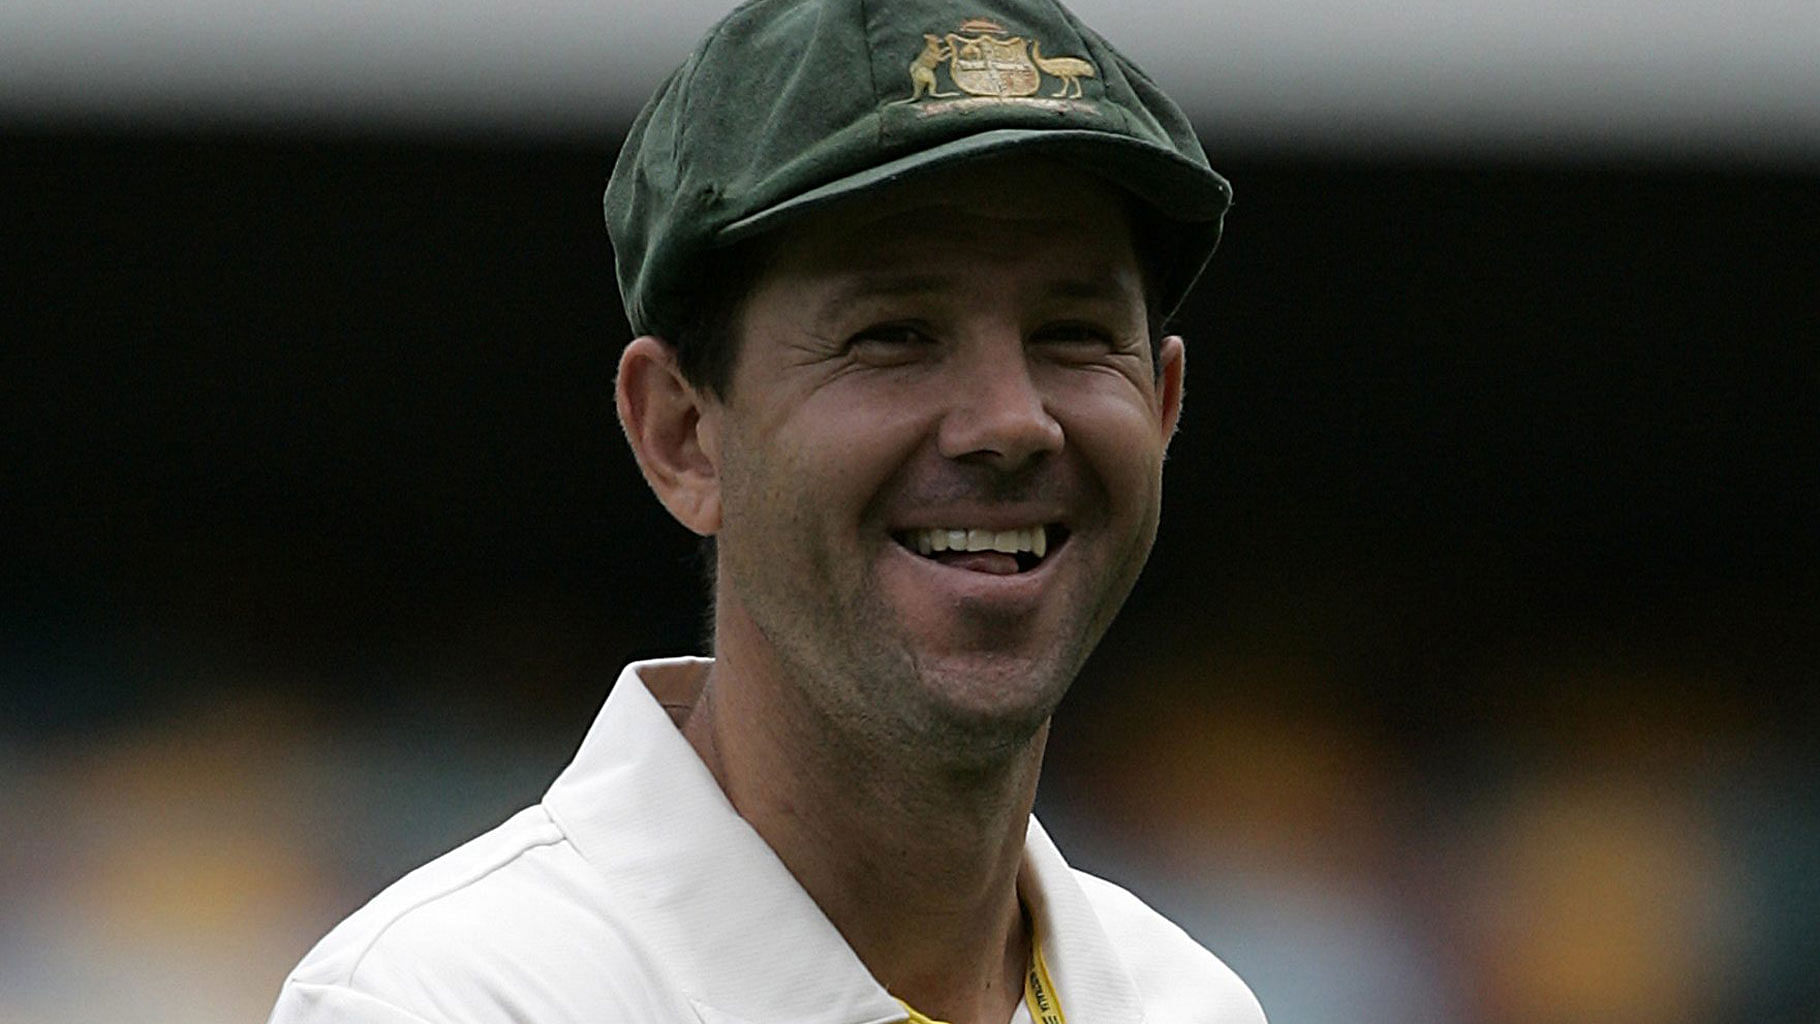 Former Australian captain Ricky Ponting on Monday, 30 December picked India skipper Virat Kohli to lead his all-star Test team of the decade, which featured four English players.